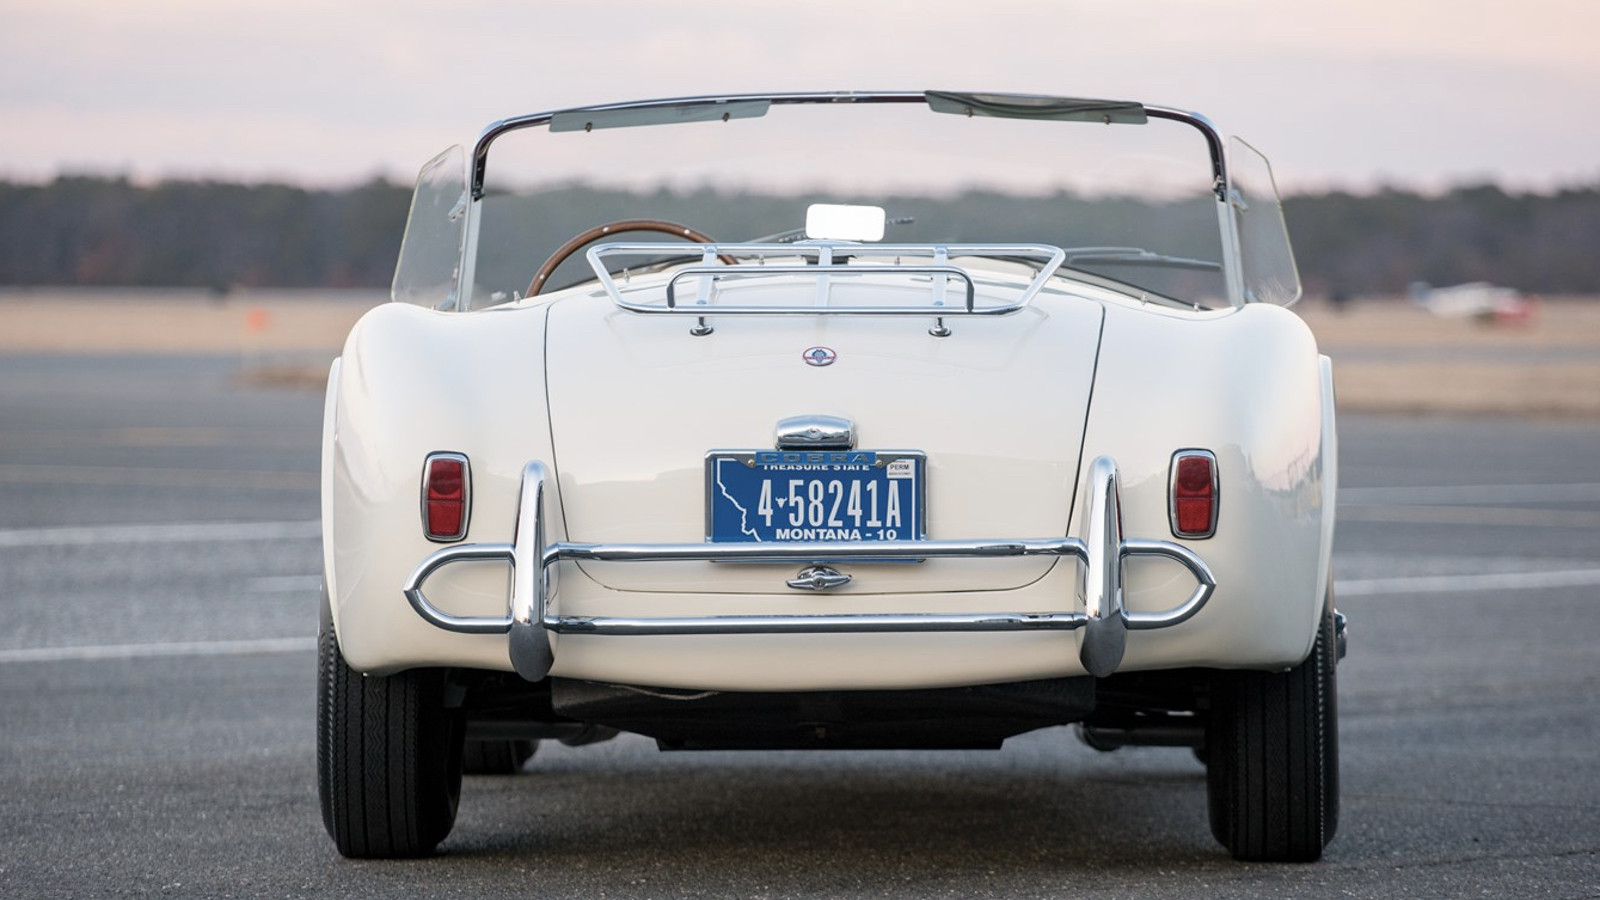 ‘90s barn-find Cobra set to fetch $1m at RM Sotheby’s Amelia Island auction 